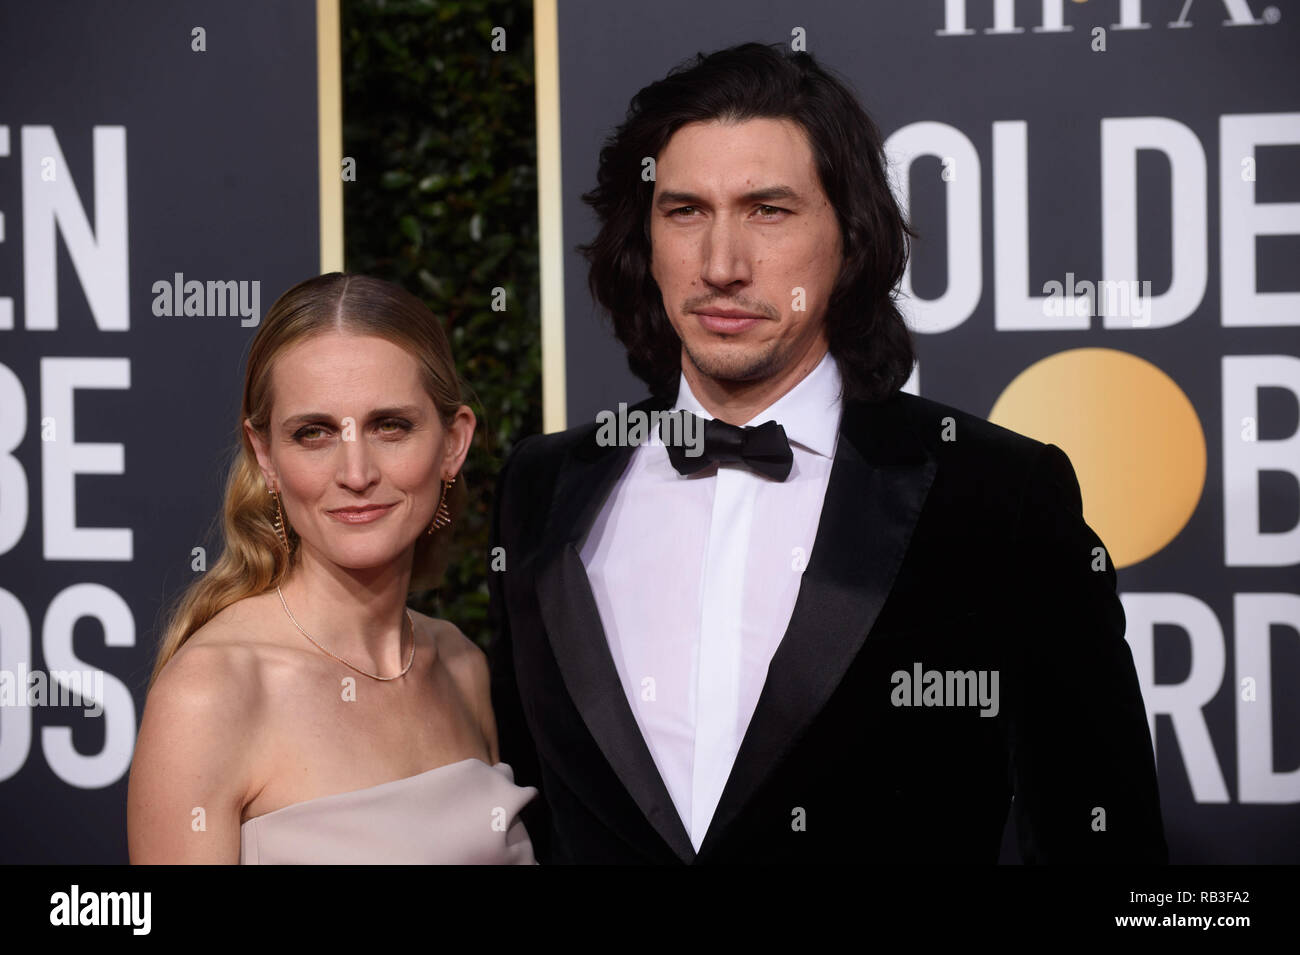 Joanne Tucker and Golden Globe nominee Adam Driver attend the 76th Annual Golden Globe Awards at the Beverly Hilton in Beverly Hills, CA on Sunday, January 6, 2019. Stock Photo